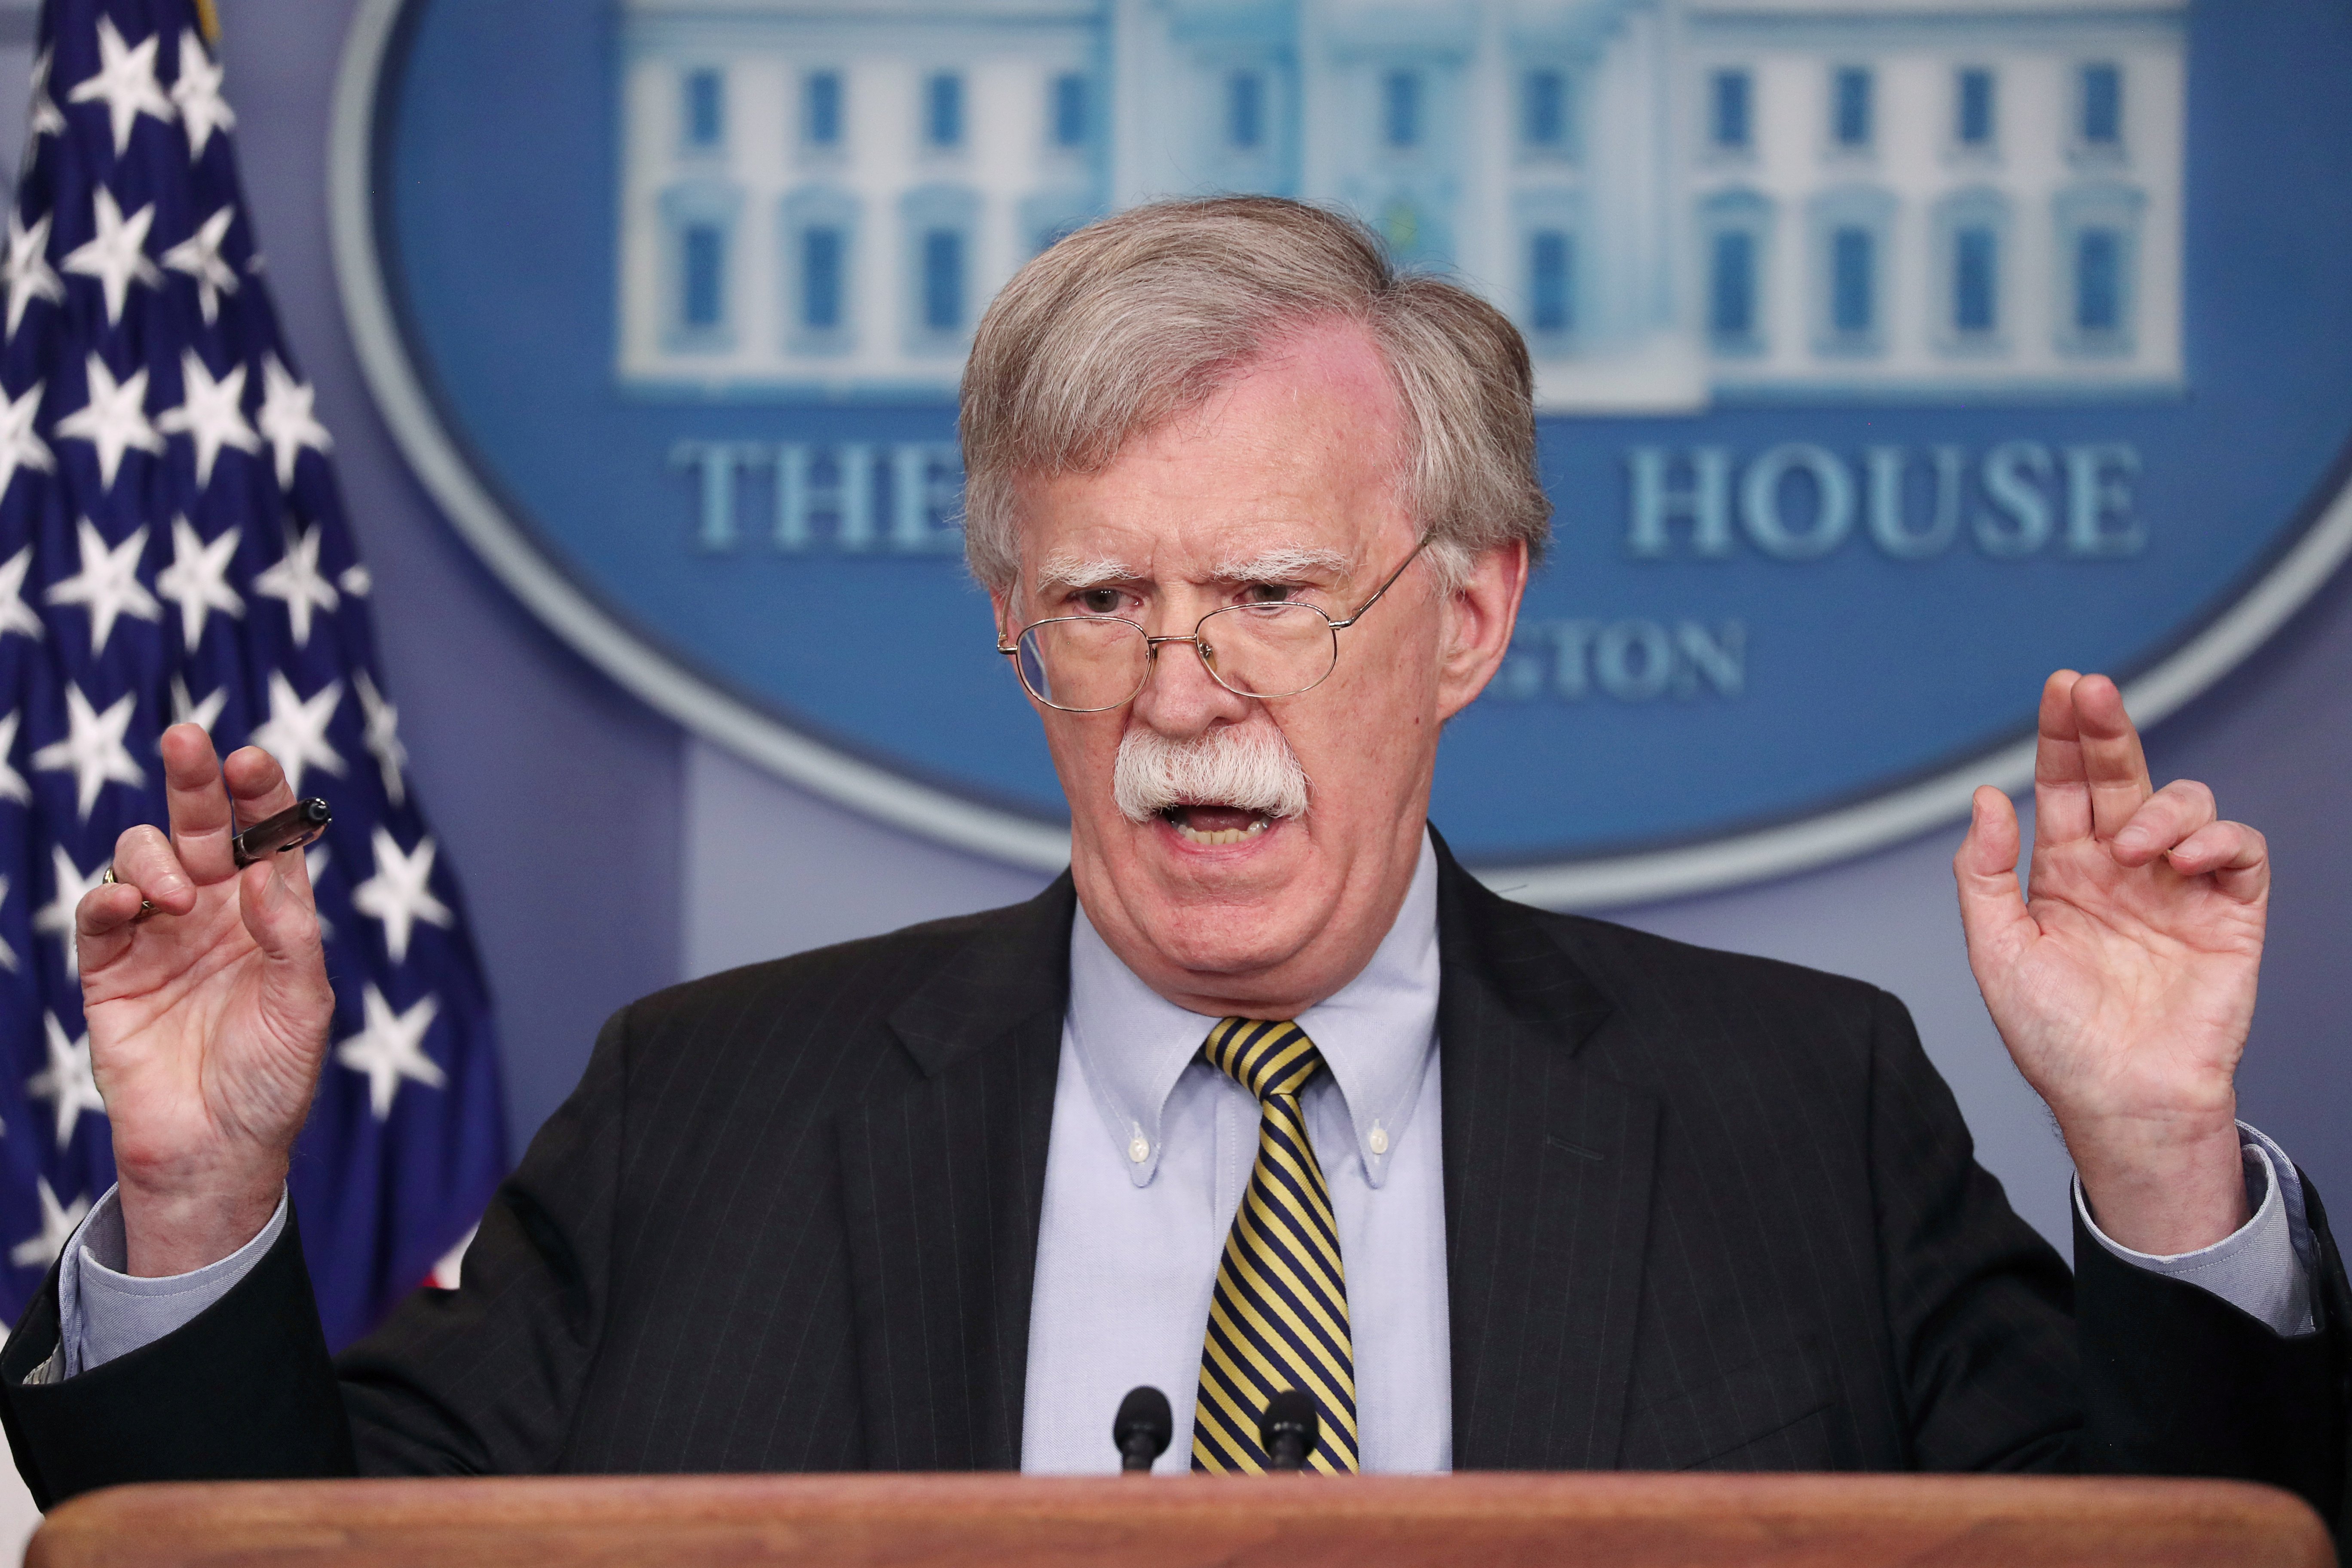 FILE PHOTO: U.S. National Security Adviser John Bolton answers a question from a reporter about how he refers to Palestine during a news conference in the White House briefing room in Washington, U.S., October 3, 2018. REUTERS/Jonathan Ernst/File Photo - RC18BF8B9EC0